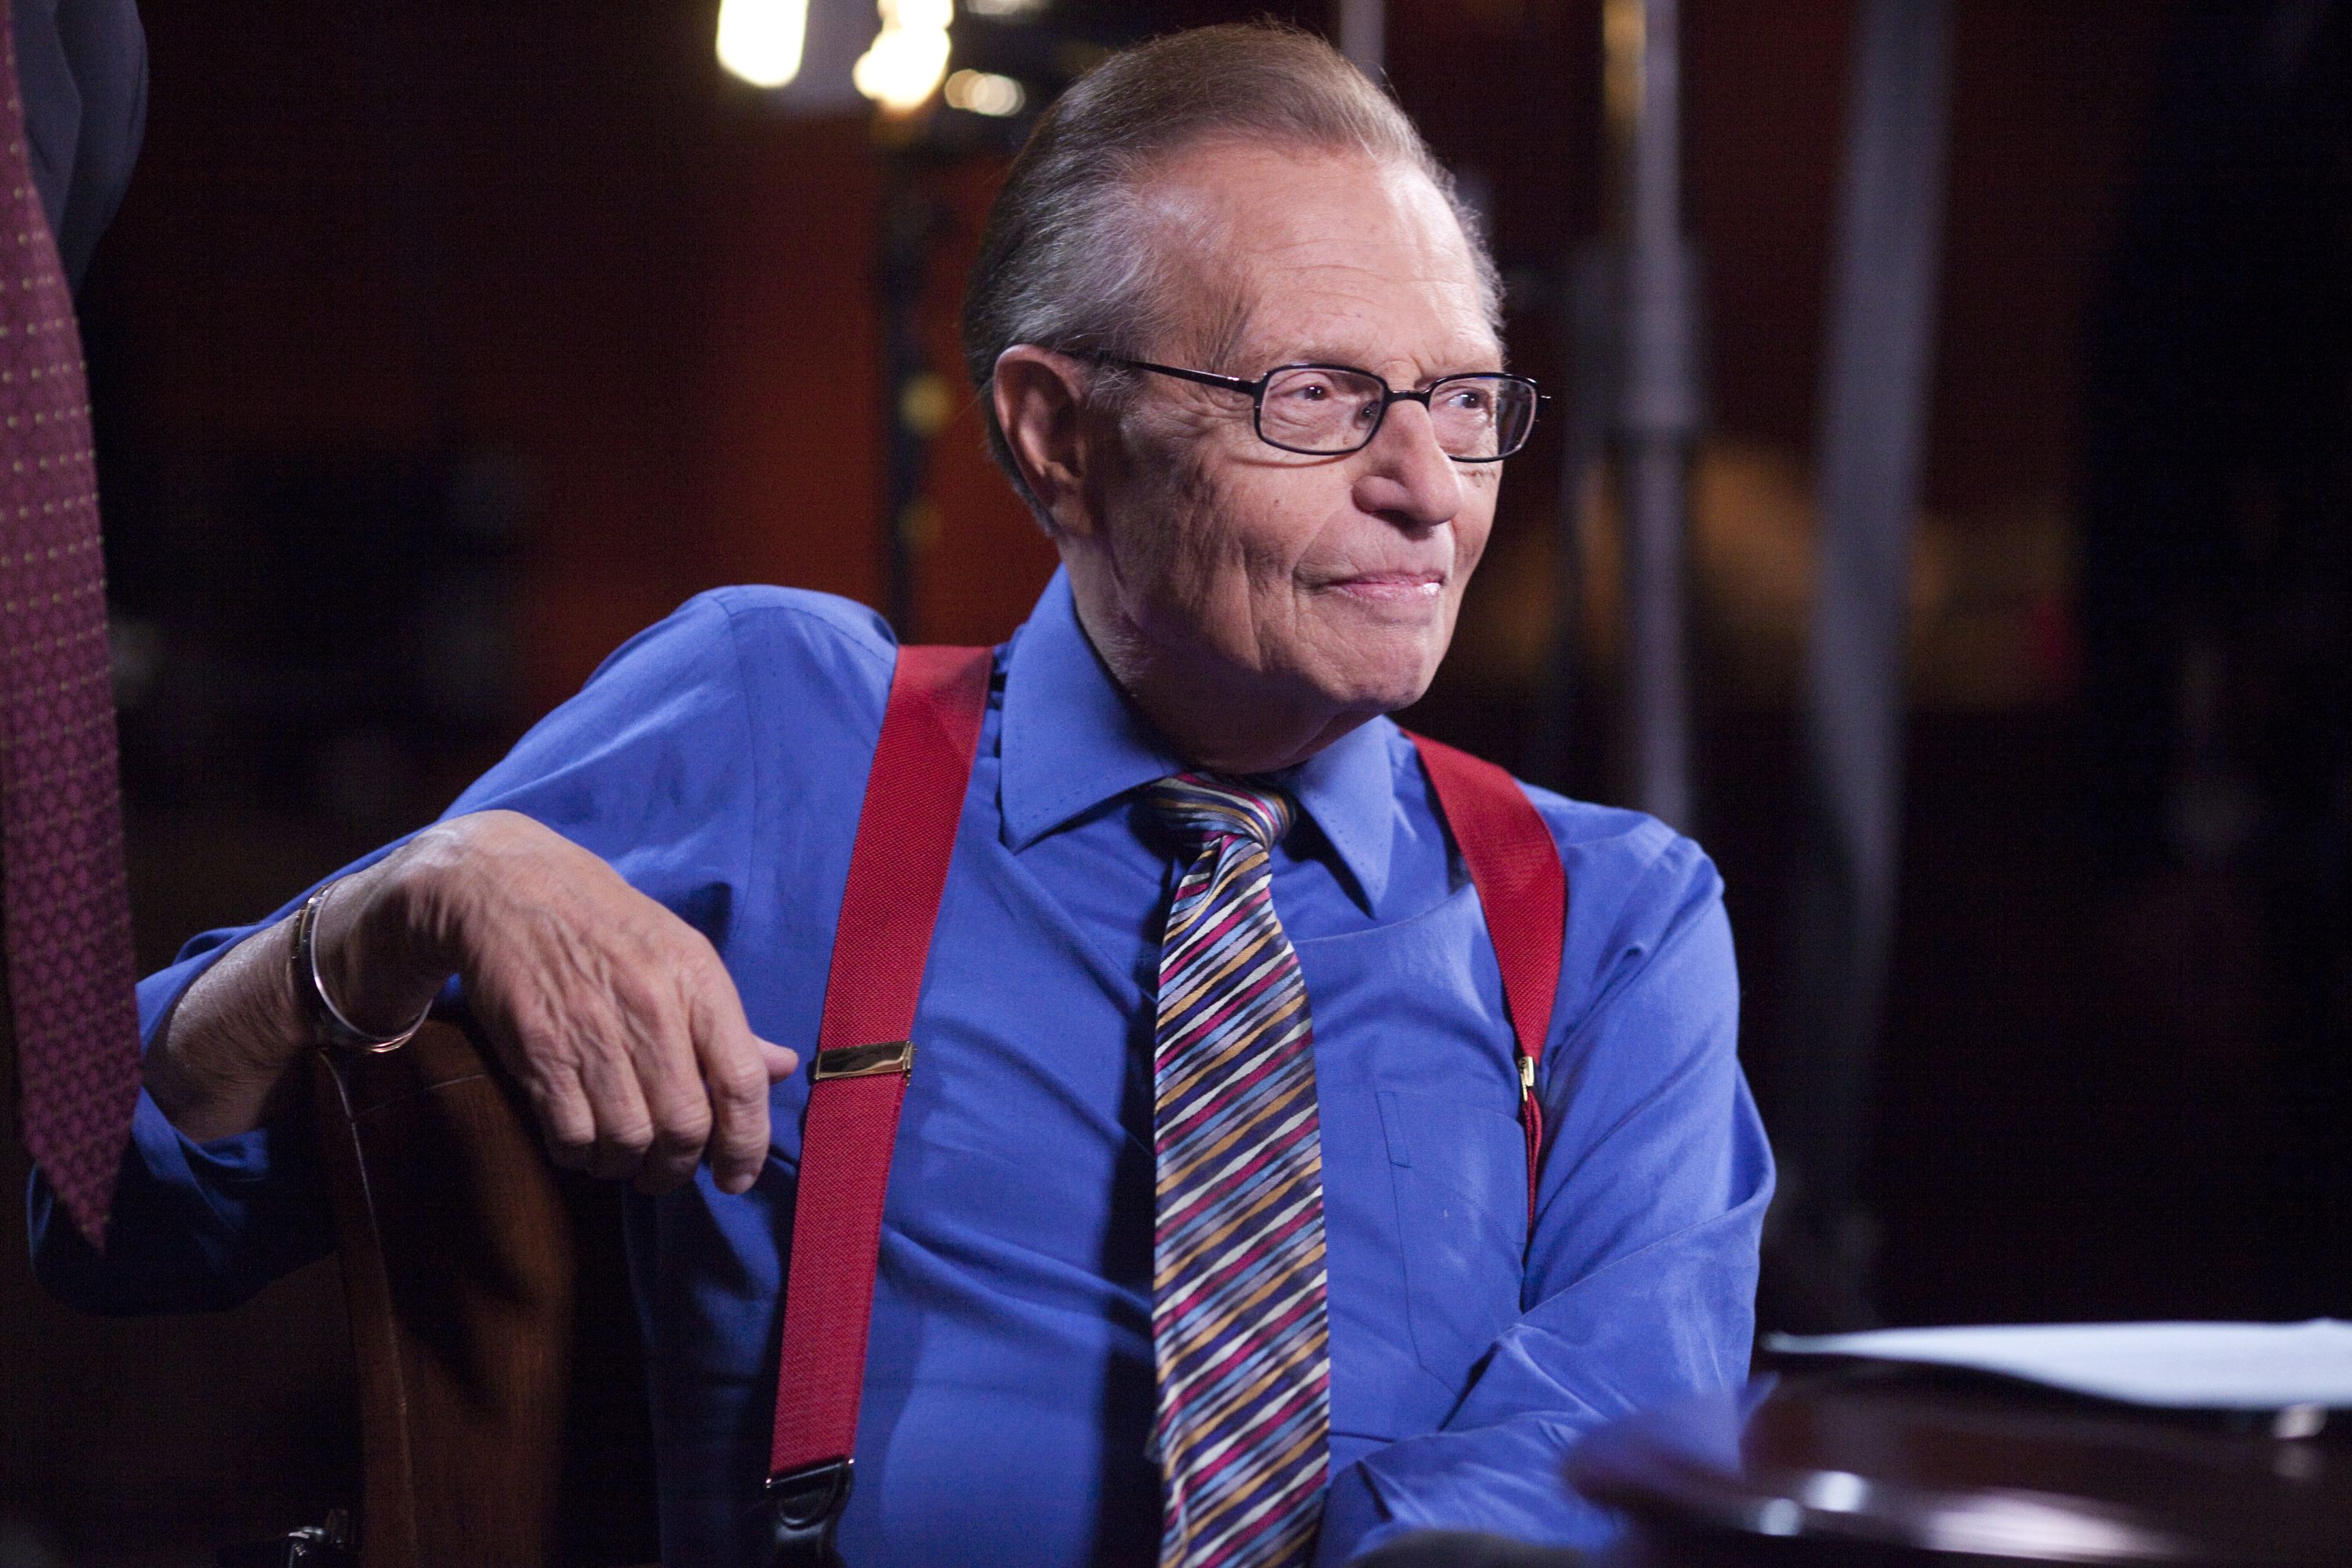 Larry King is seen on the set of his CNN show in 2010.